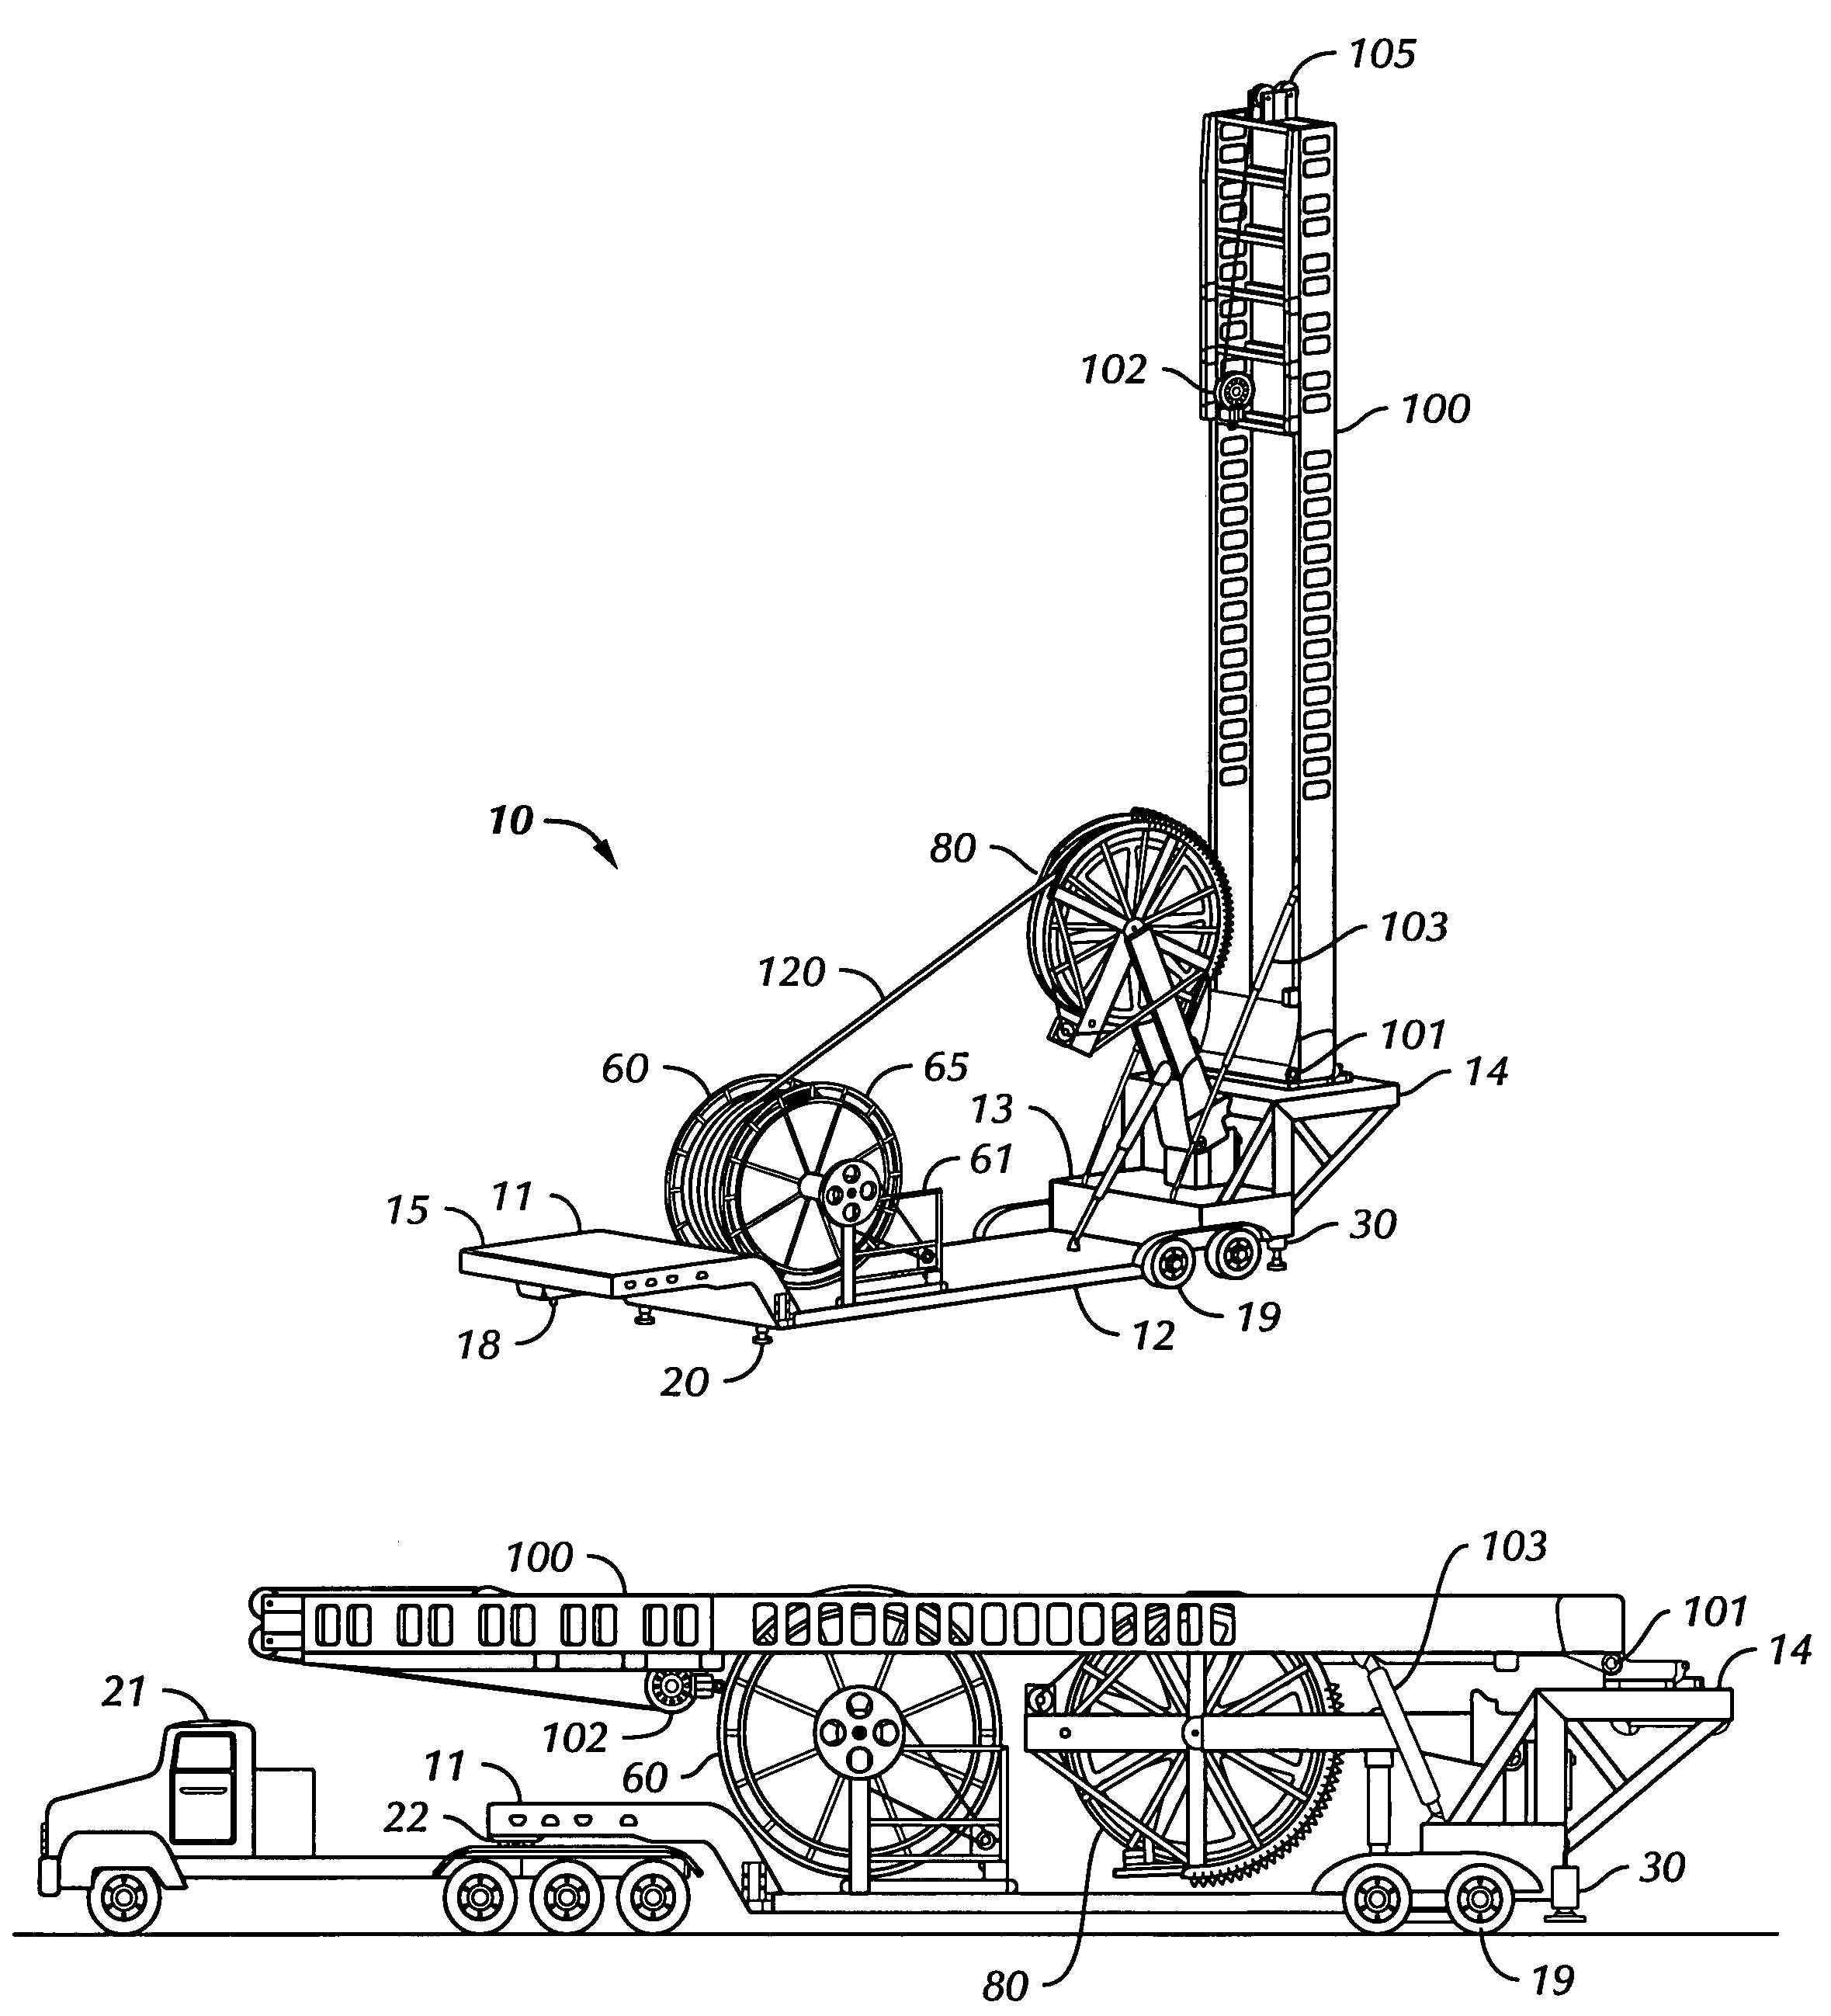 Combination workover and drilling rig